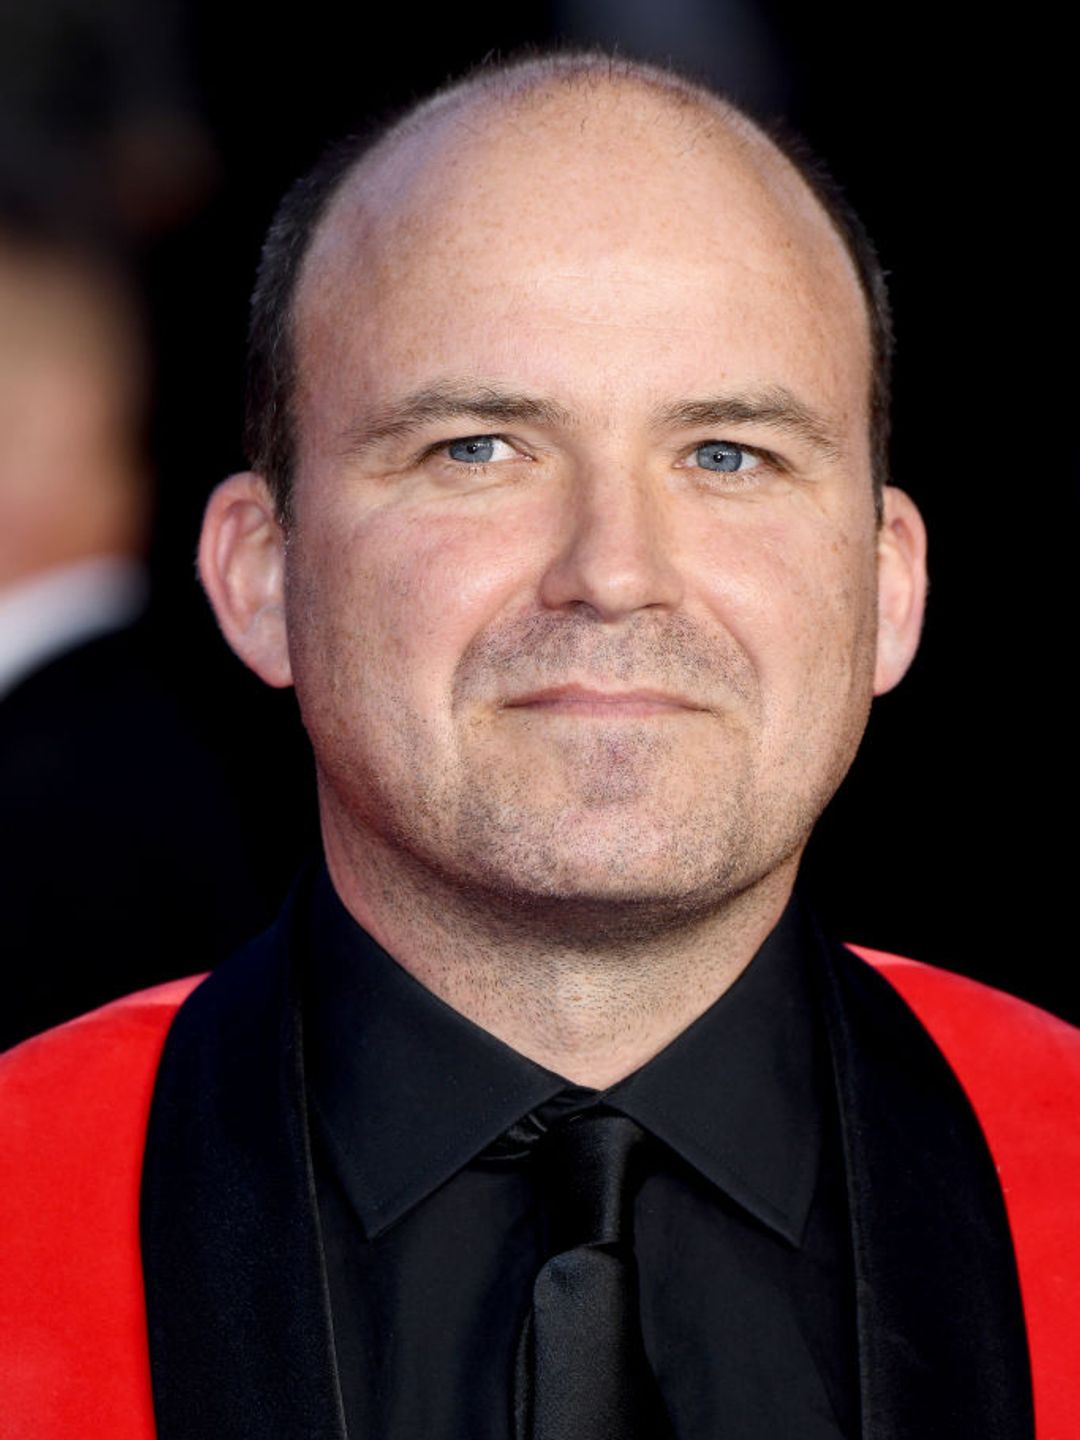 Rory Kinnear wearing a red suit at a premiere